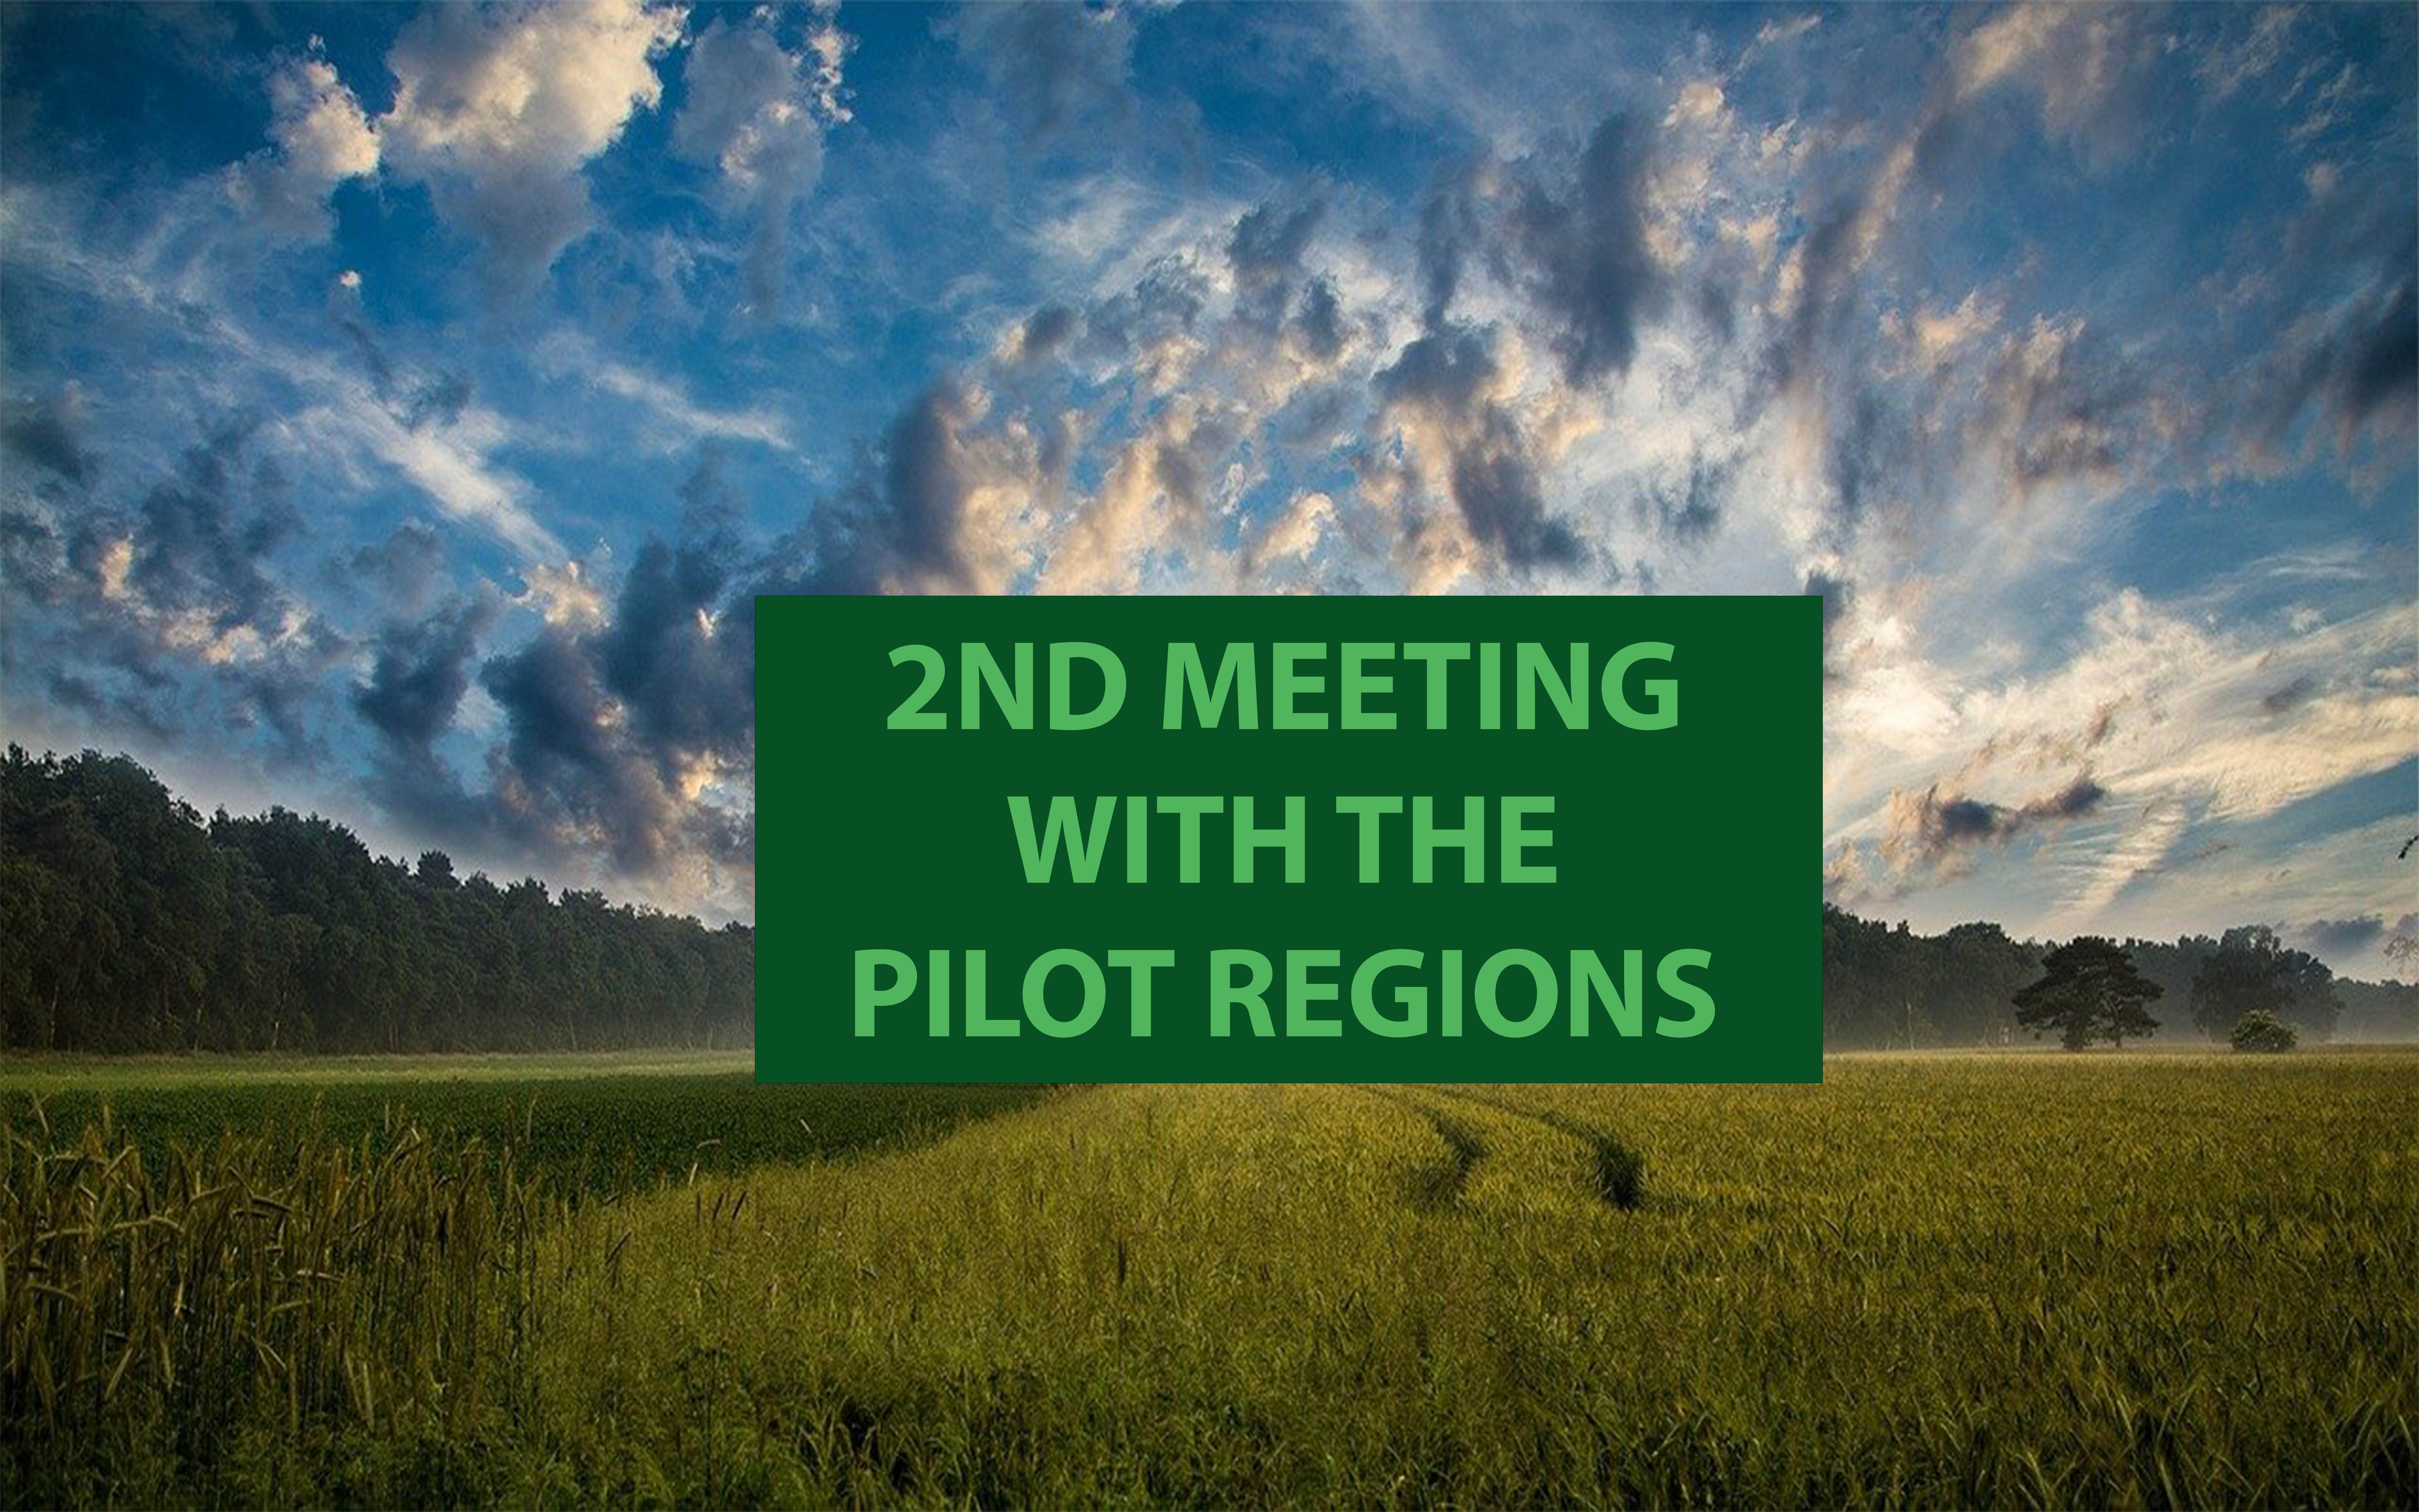 2nd meeting with the pilot regions